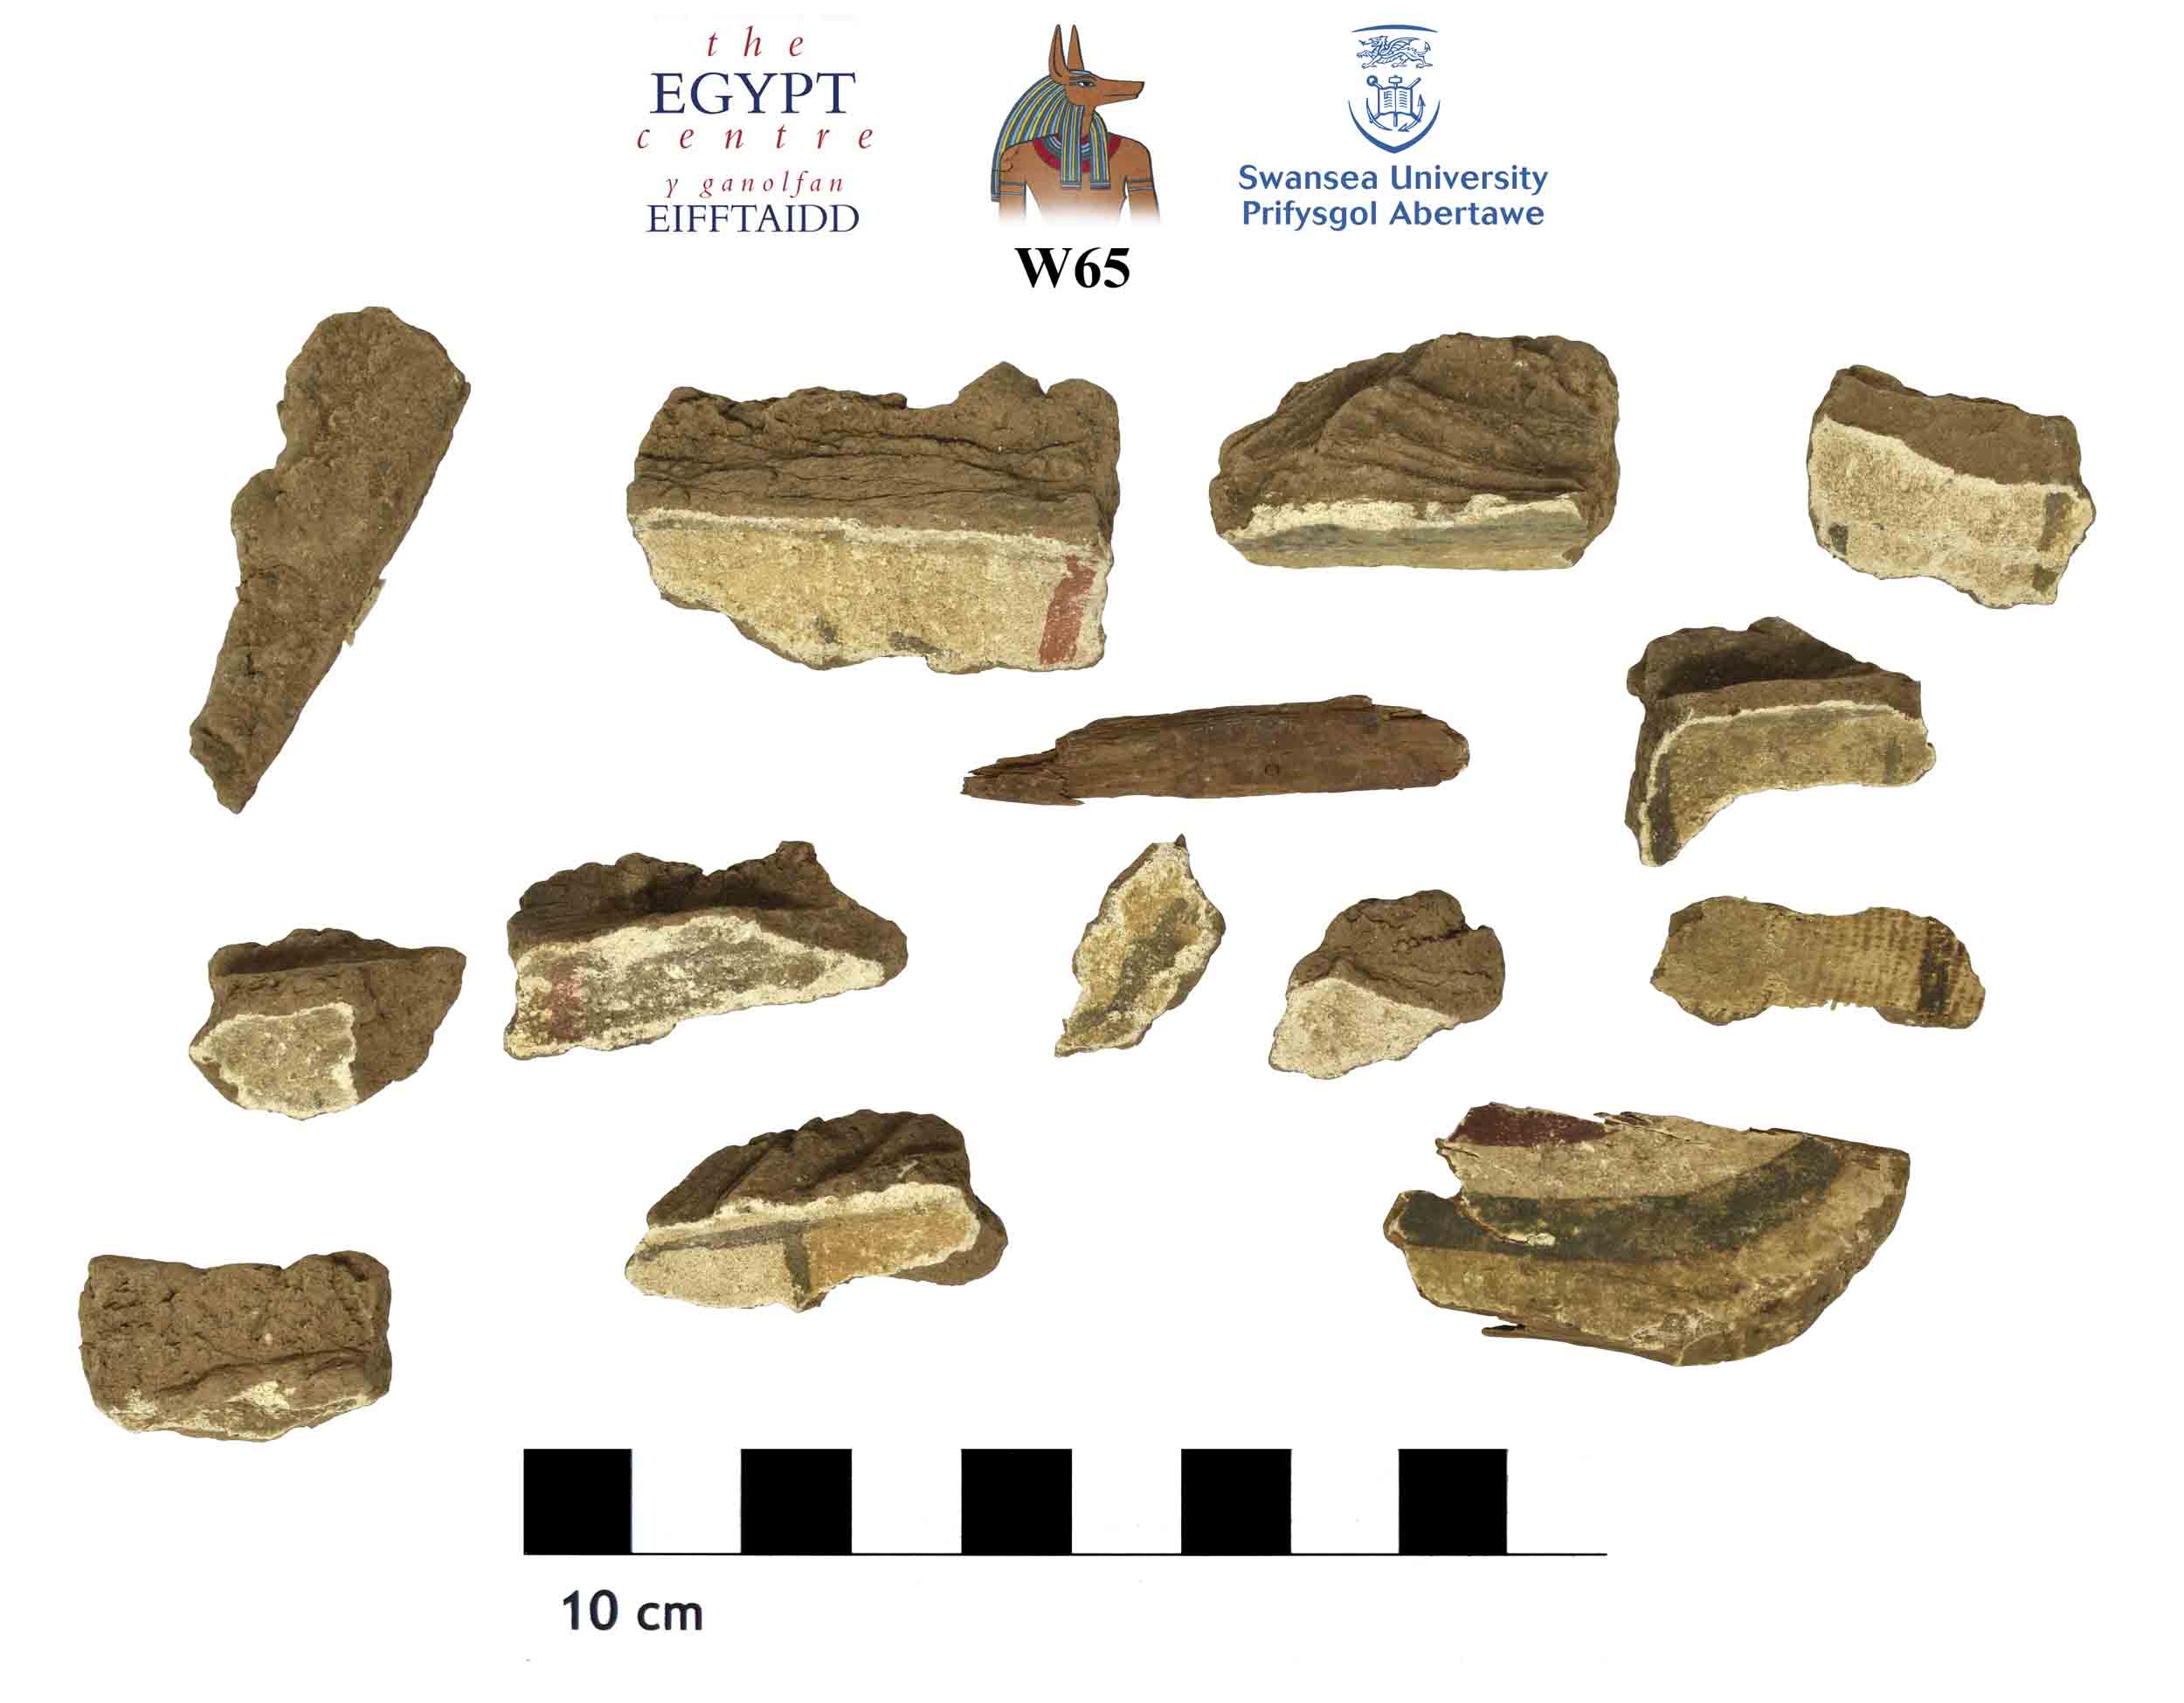 Image for: Sherds of pottery and fragments of plaster